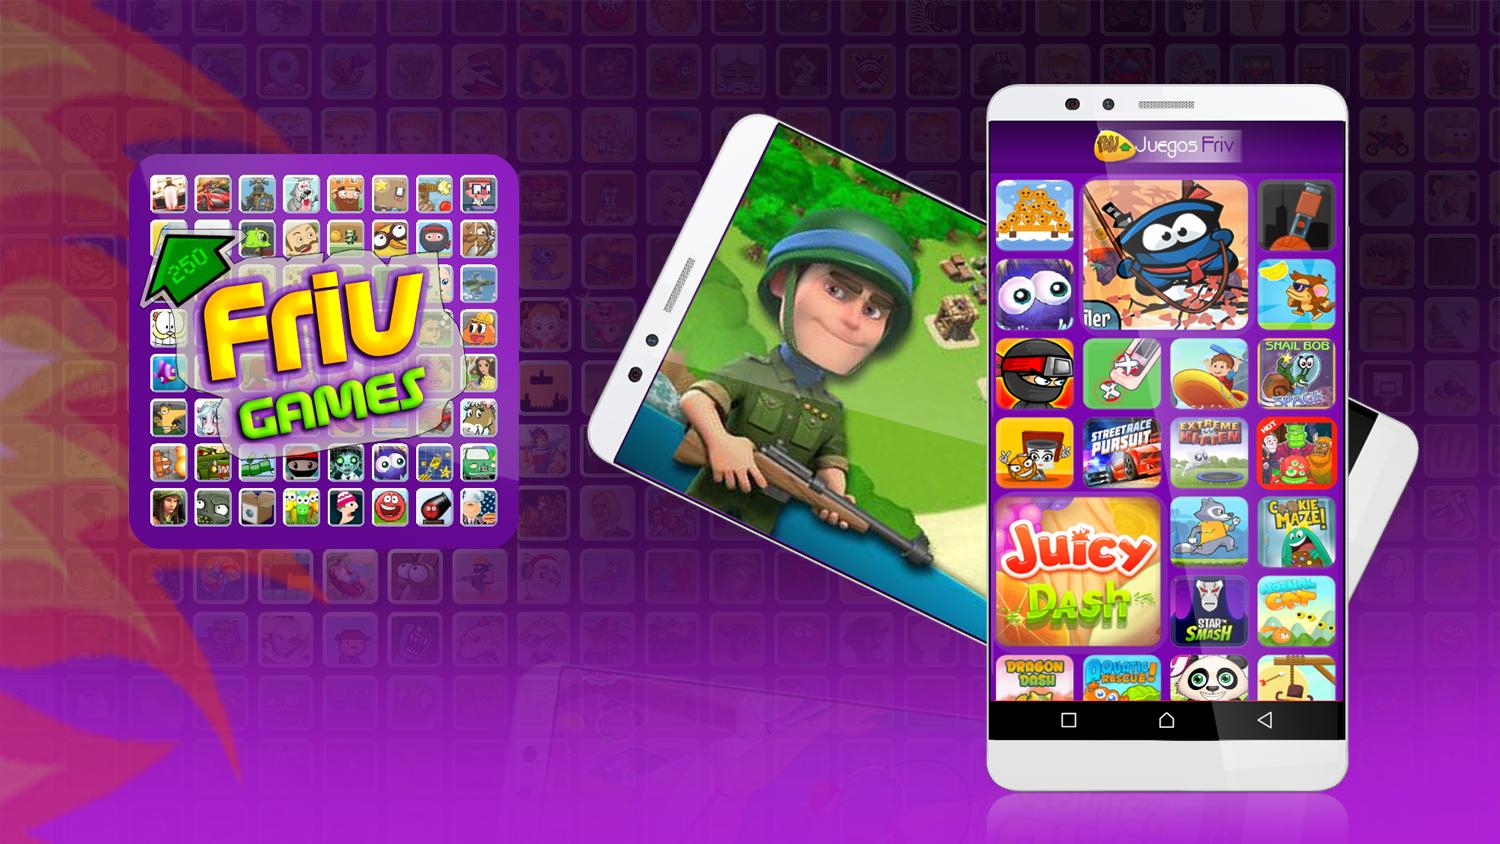 Juegos Friv for Android - APK Download